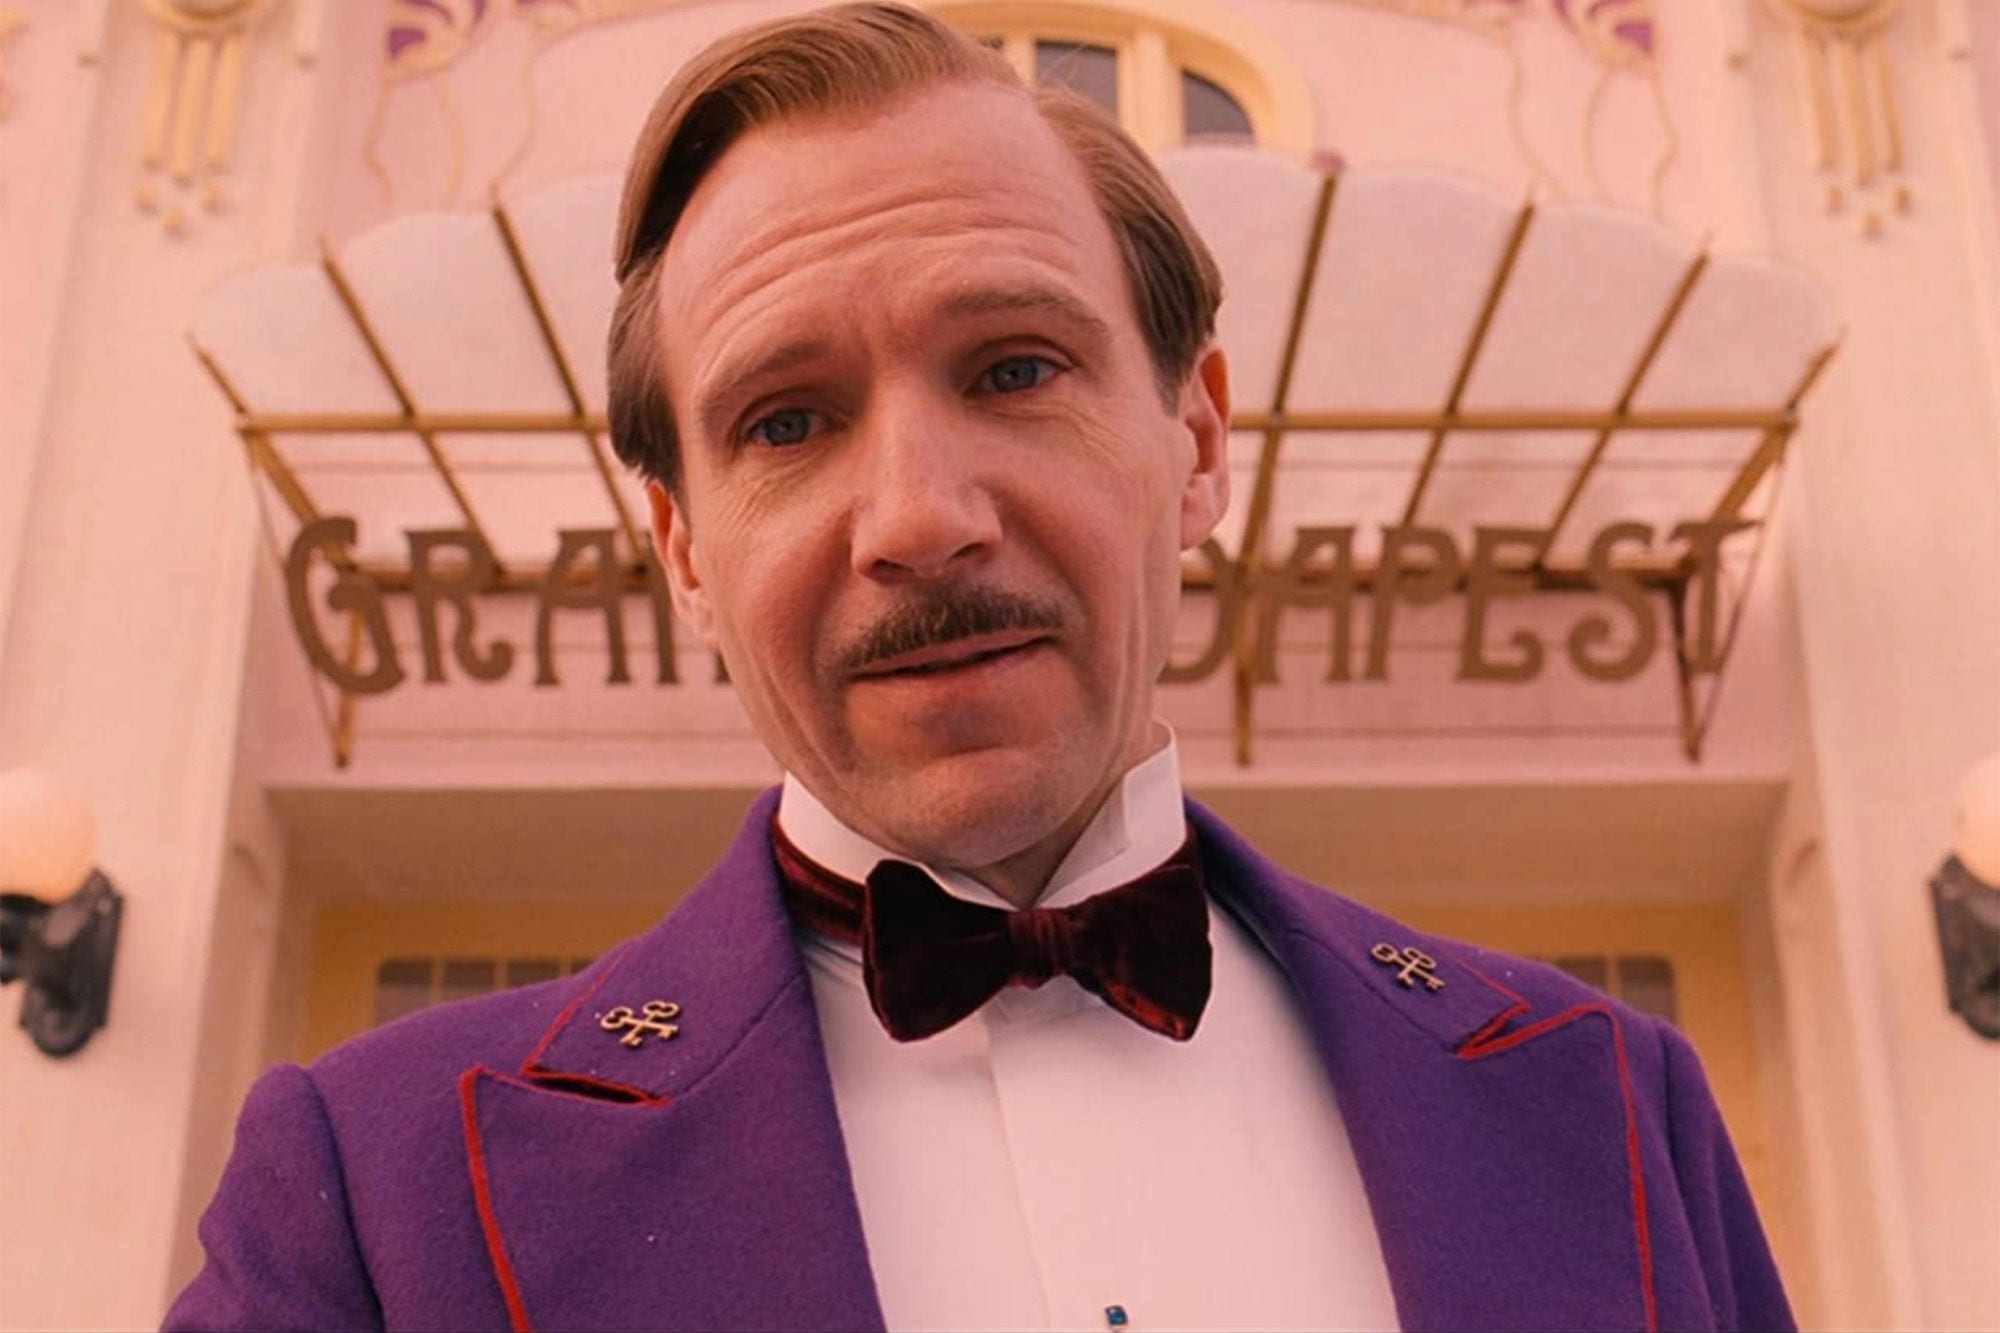 ‘The Grand Budapest Hotel’ Gorgeously Conveys Our Need for Poise and Elegance